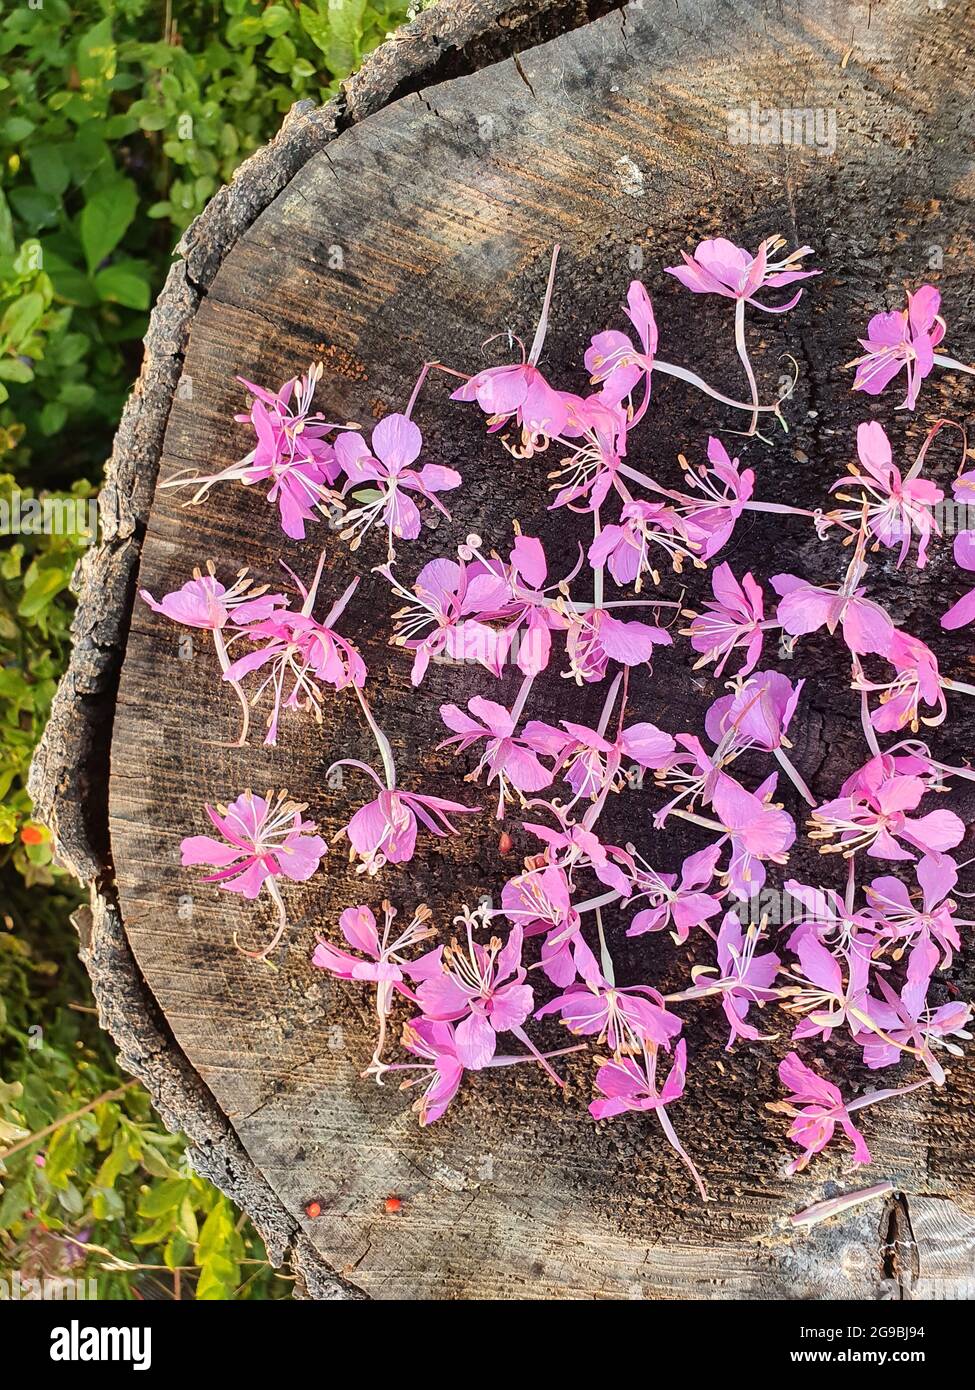 Tea plant flowers lie on a wooden stump. Pink flowers are collected for future consumption. Stock Photo